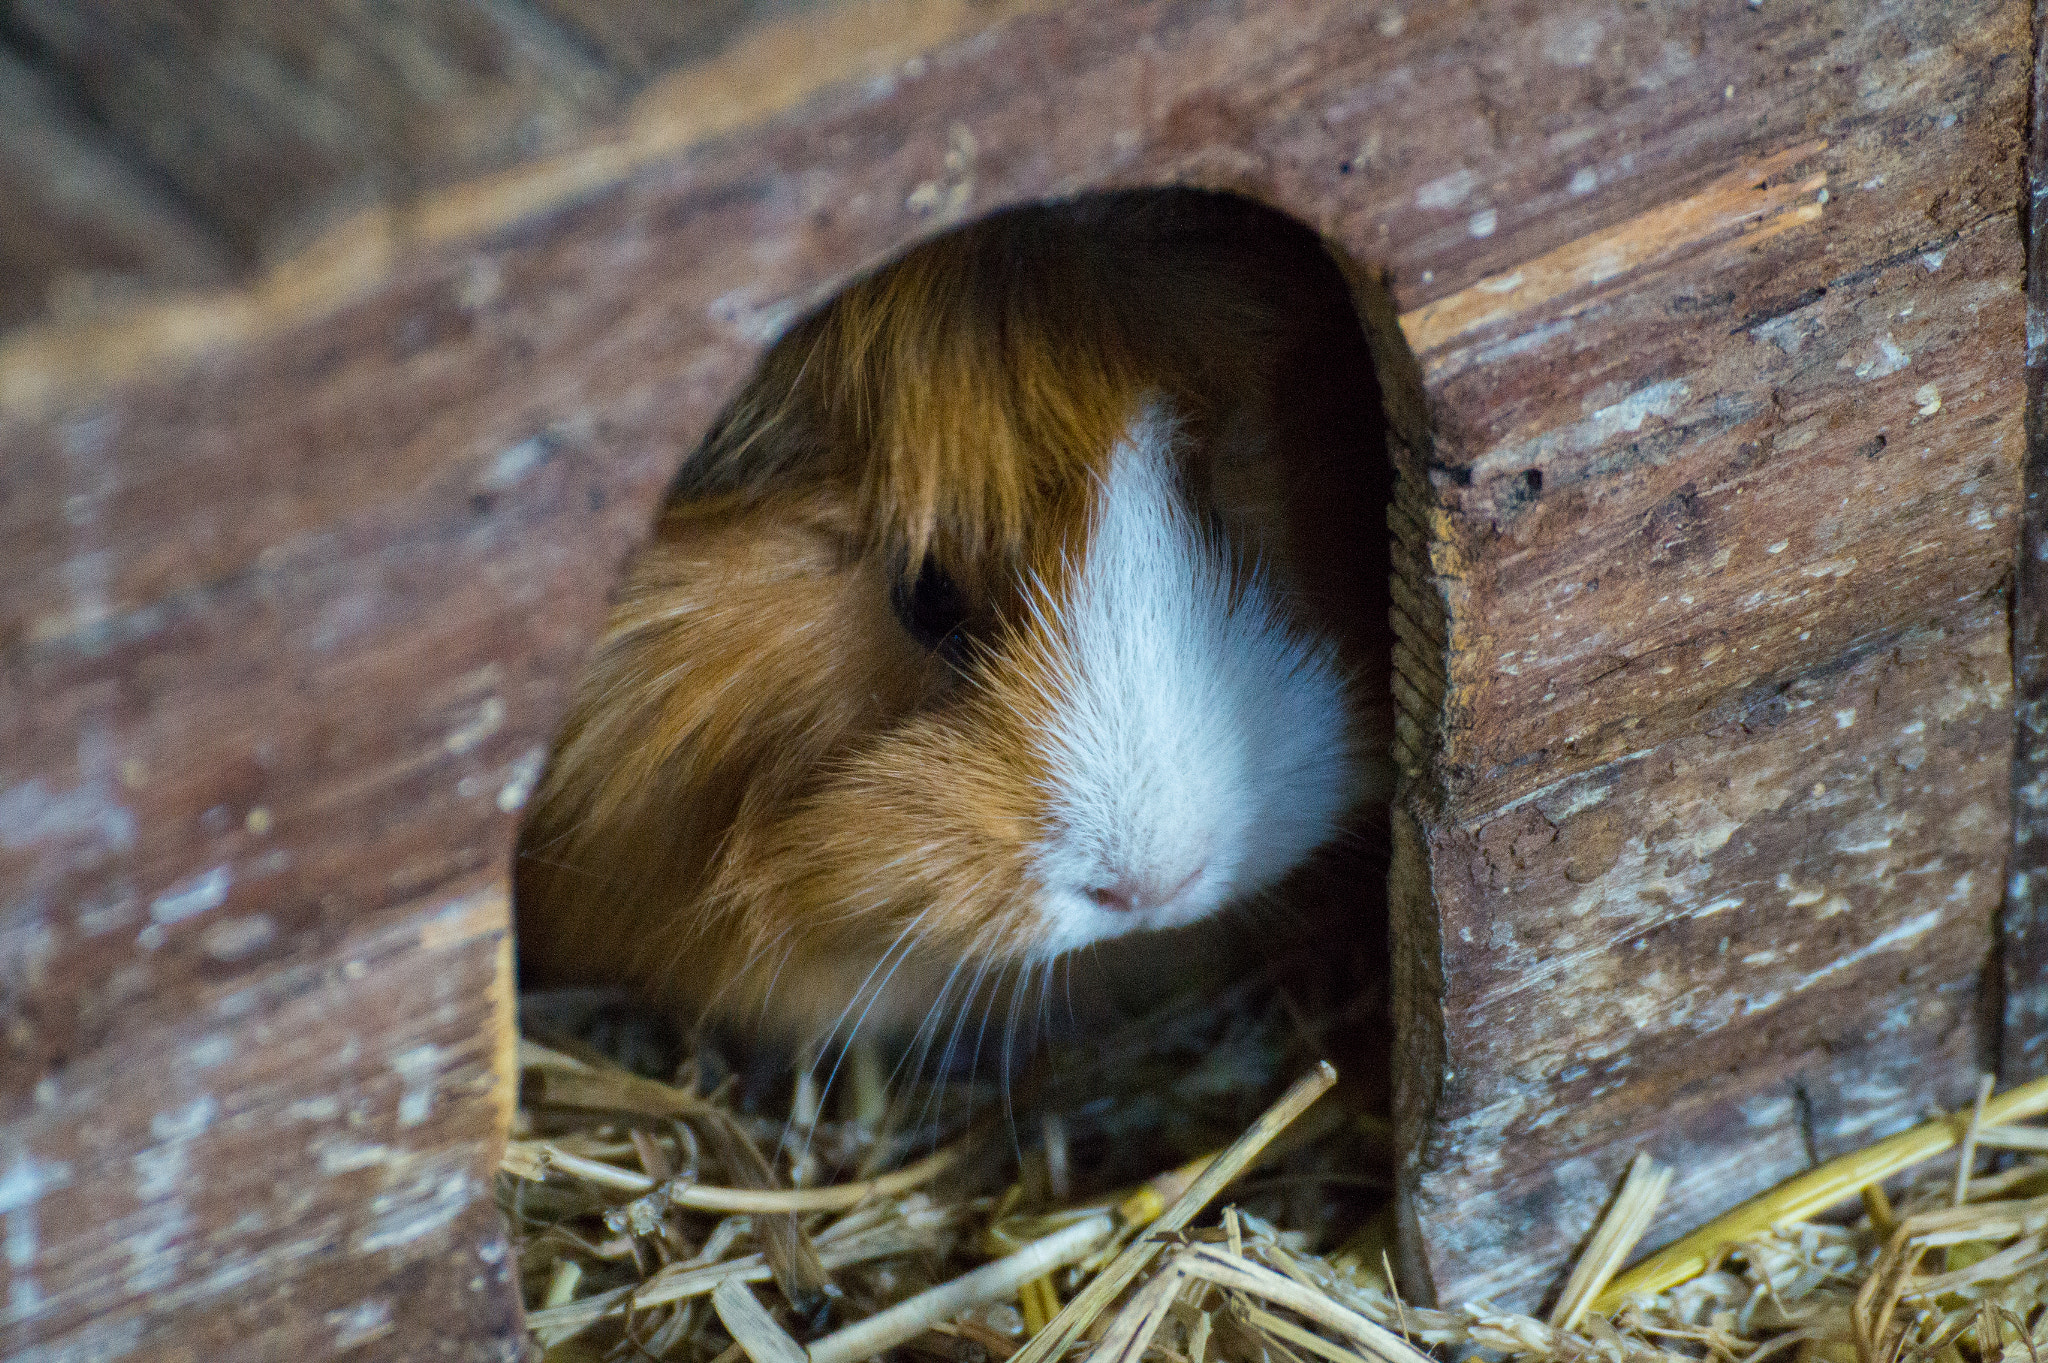 Sony SLT-A58 + Tamron SP 70-300mm F4-5.6 Di USD sample photo. Shy guinea pig photography